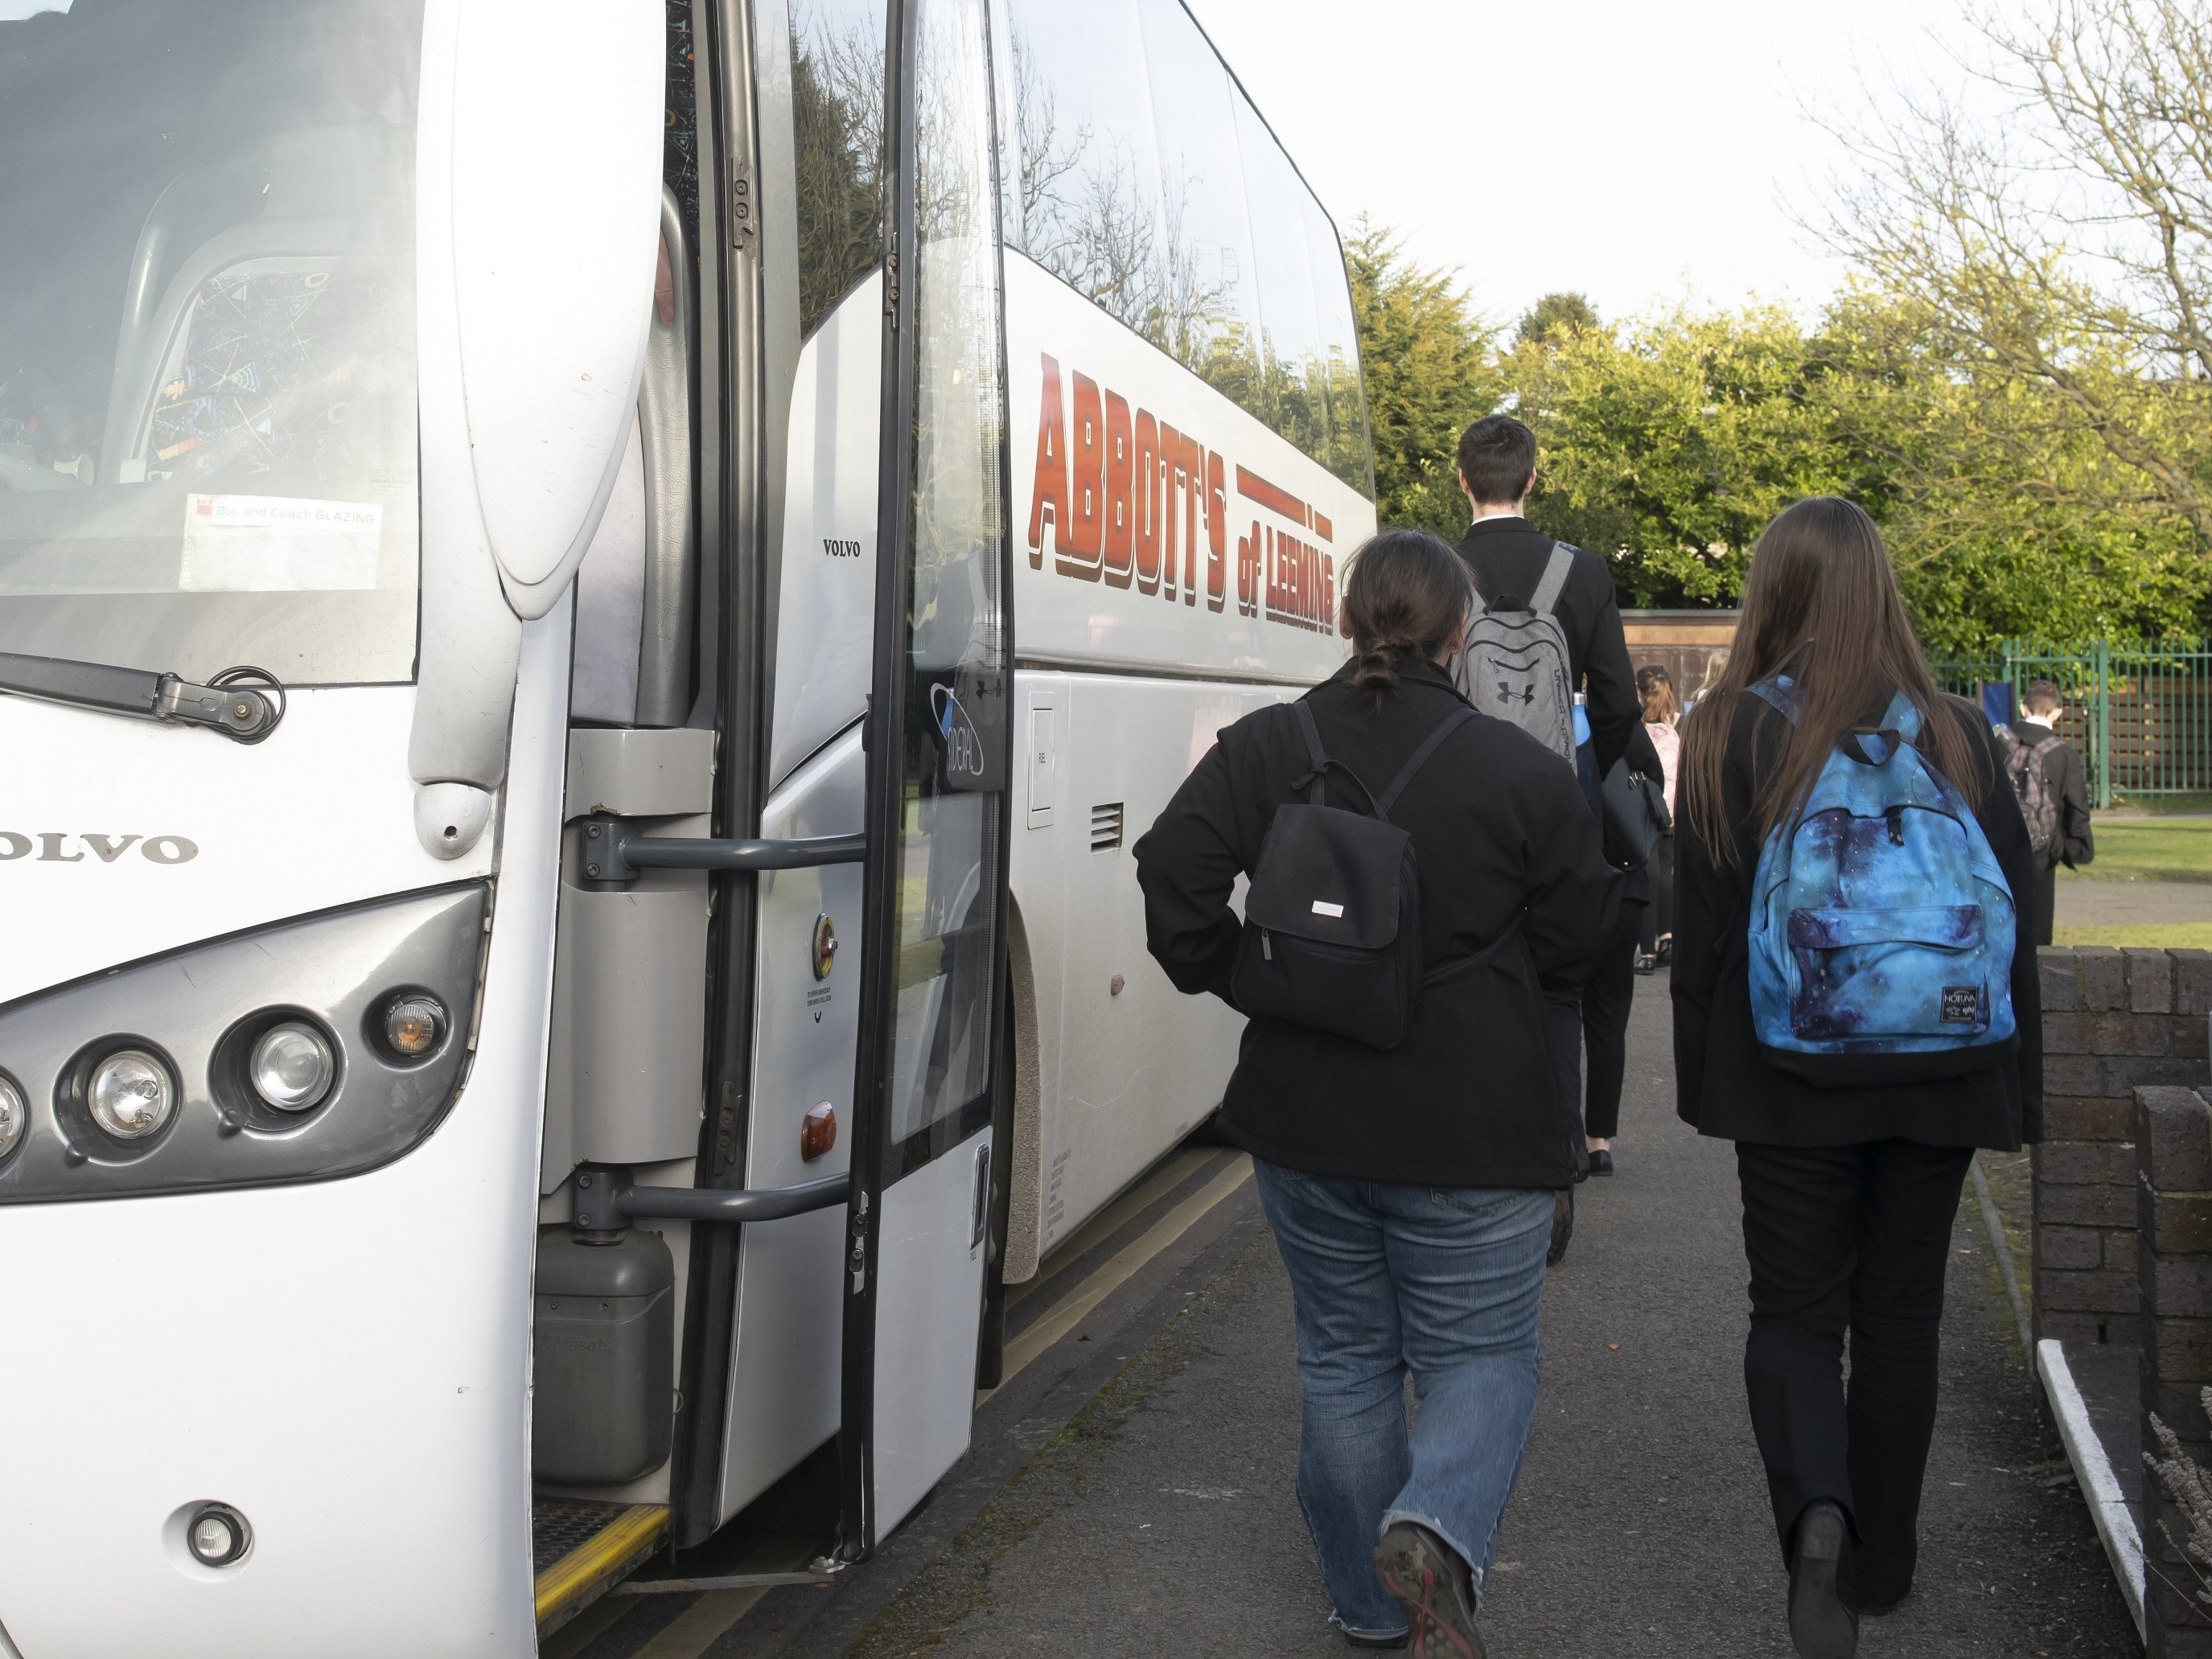 A public consultation around providing home to school travel will be discussed by North Yorkshire councillors next week.